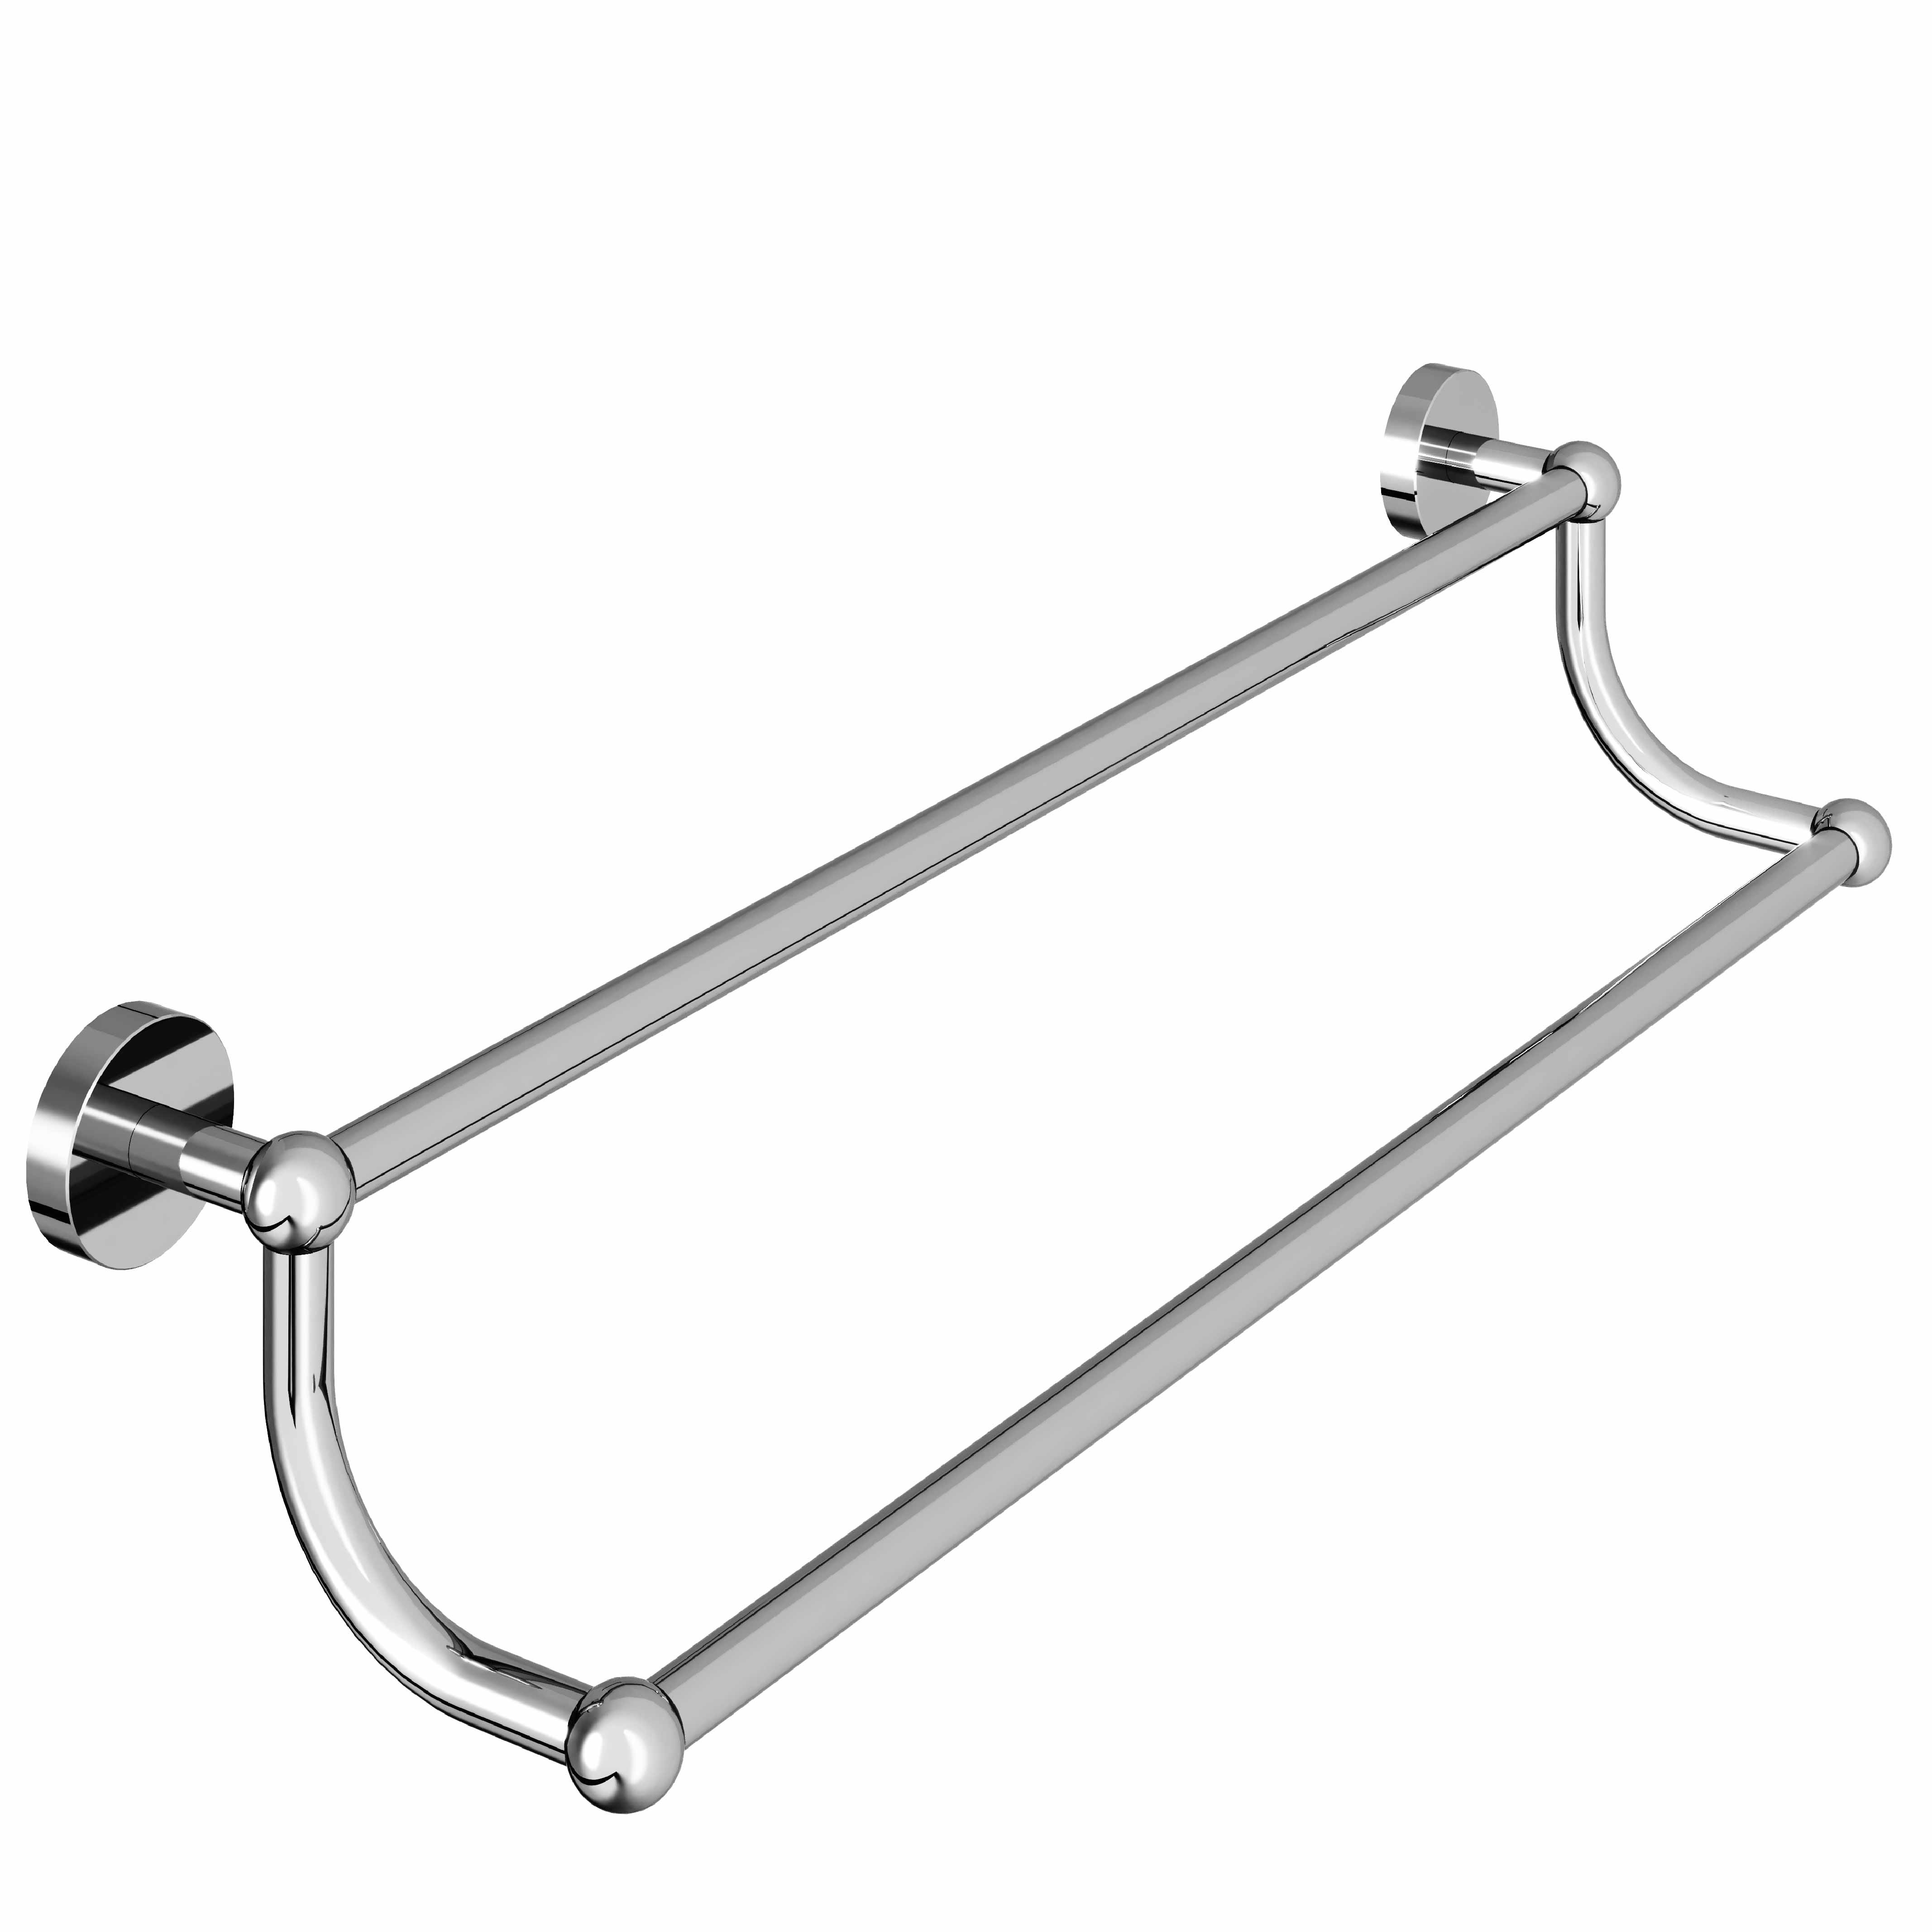 M91-509 Wall mounted double towel bar